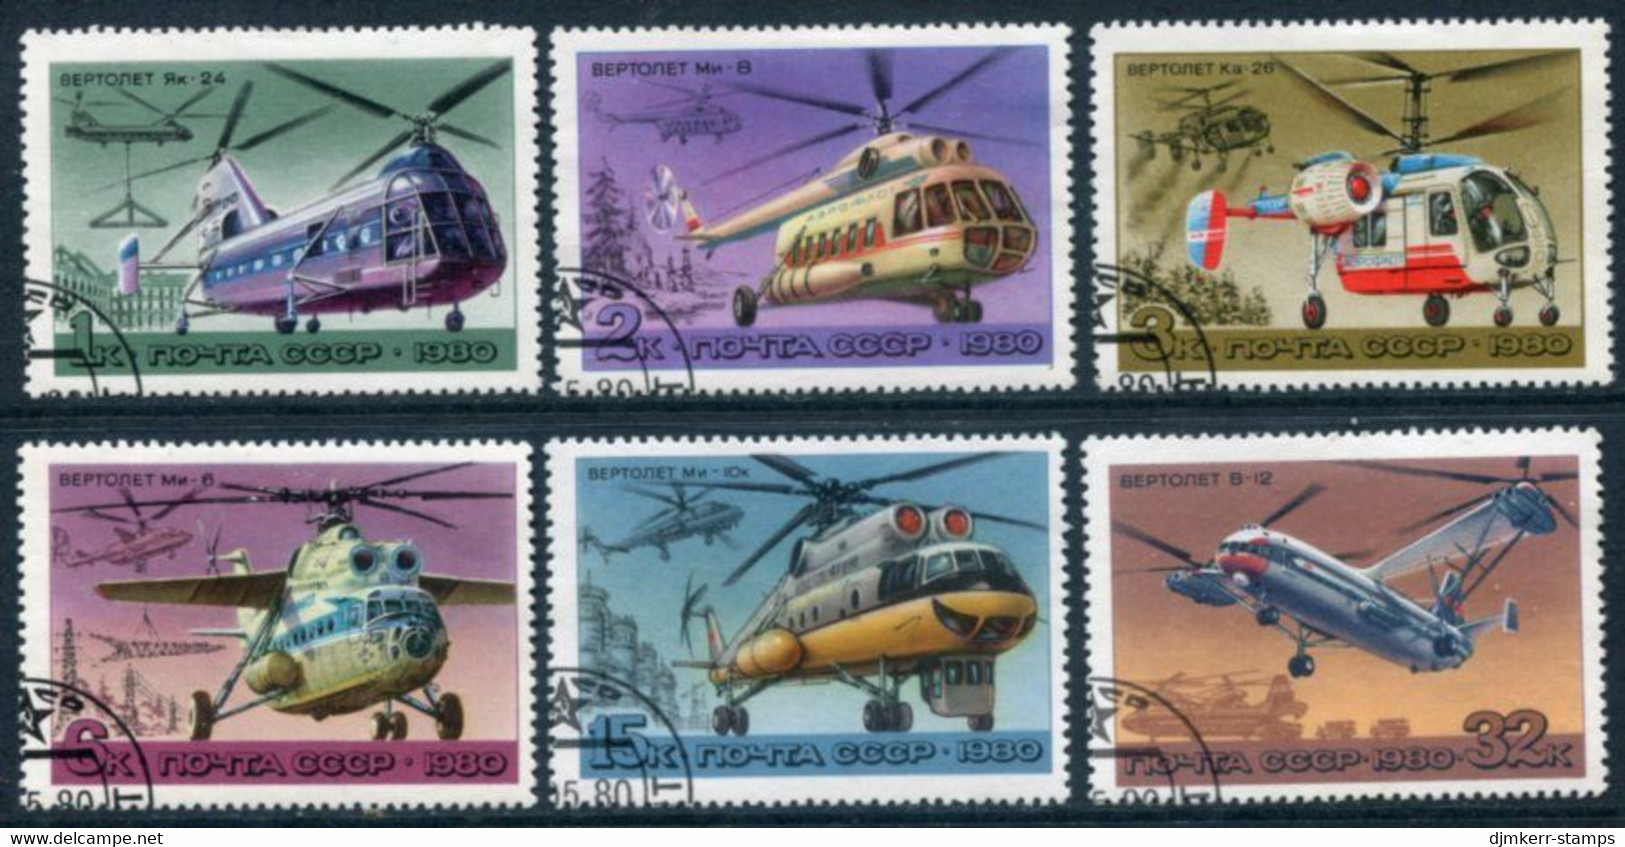 SOVIET UNION 1980 Helicopters Set Of 6 Used.  Michel 4956-61 - Used Stamps